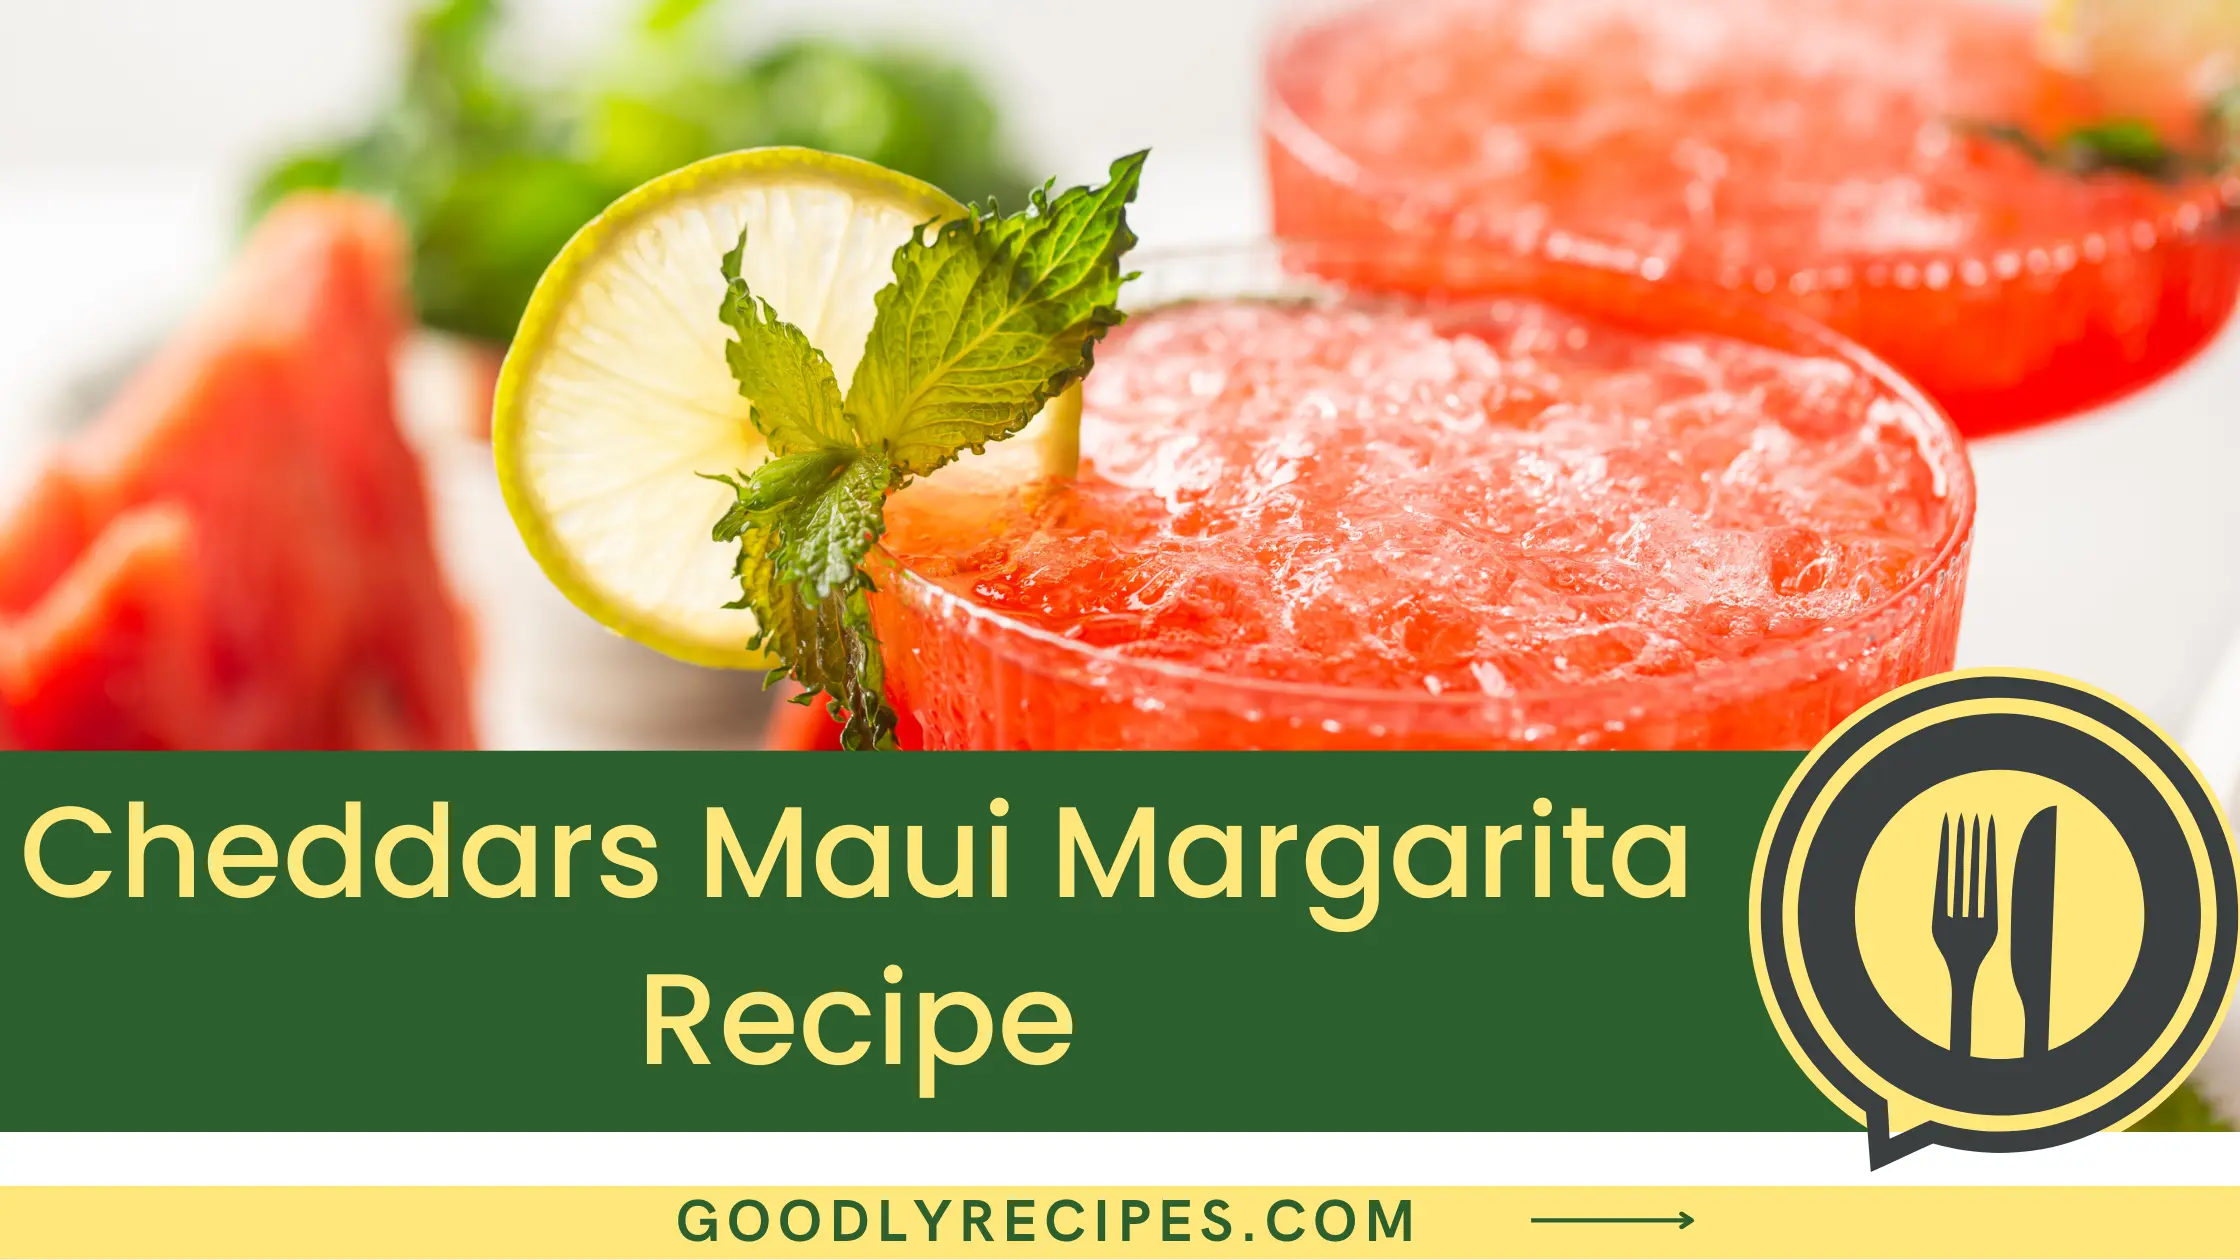 What is Cheddars Maui Margarita?